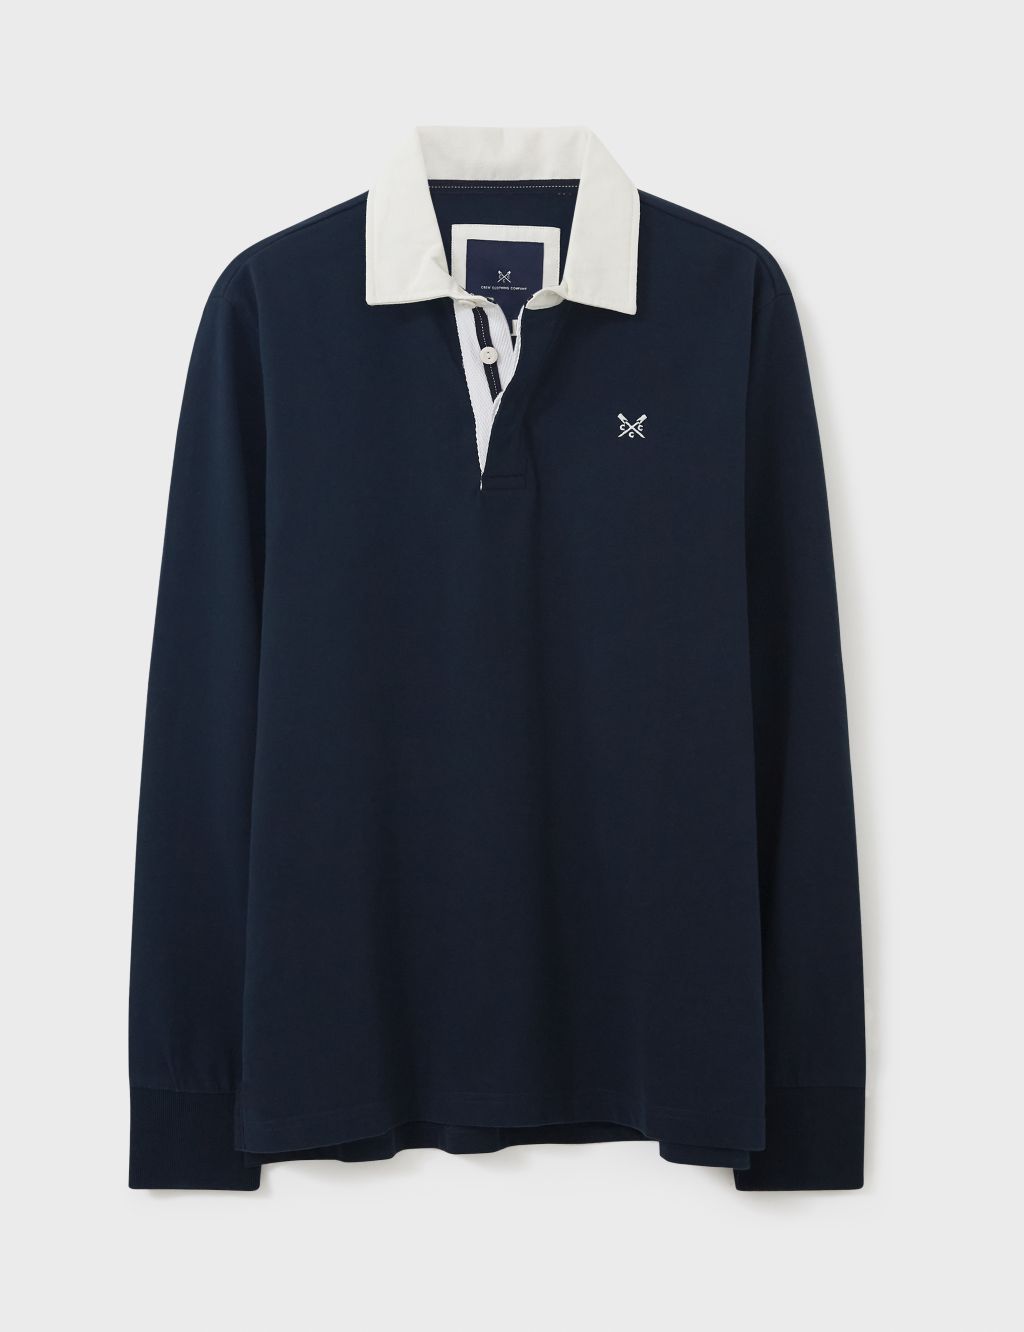 Men’s Long-Sleeved Rugby Shirts | M&S